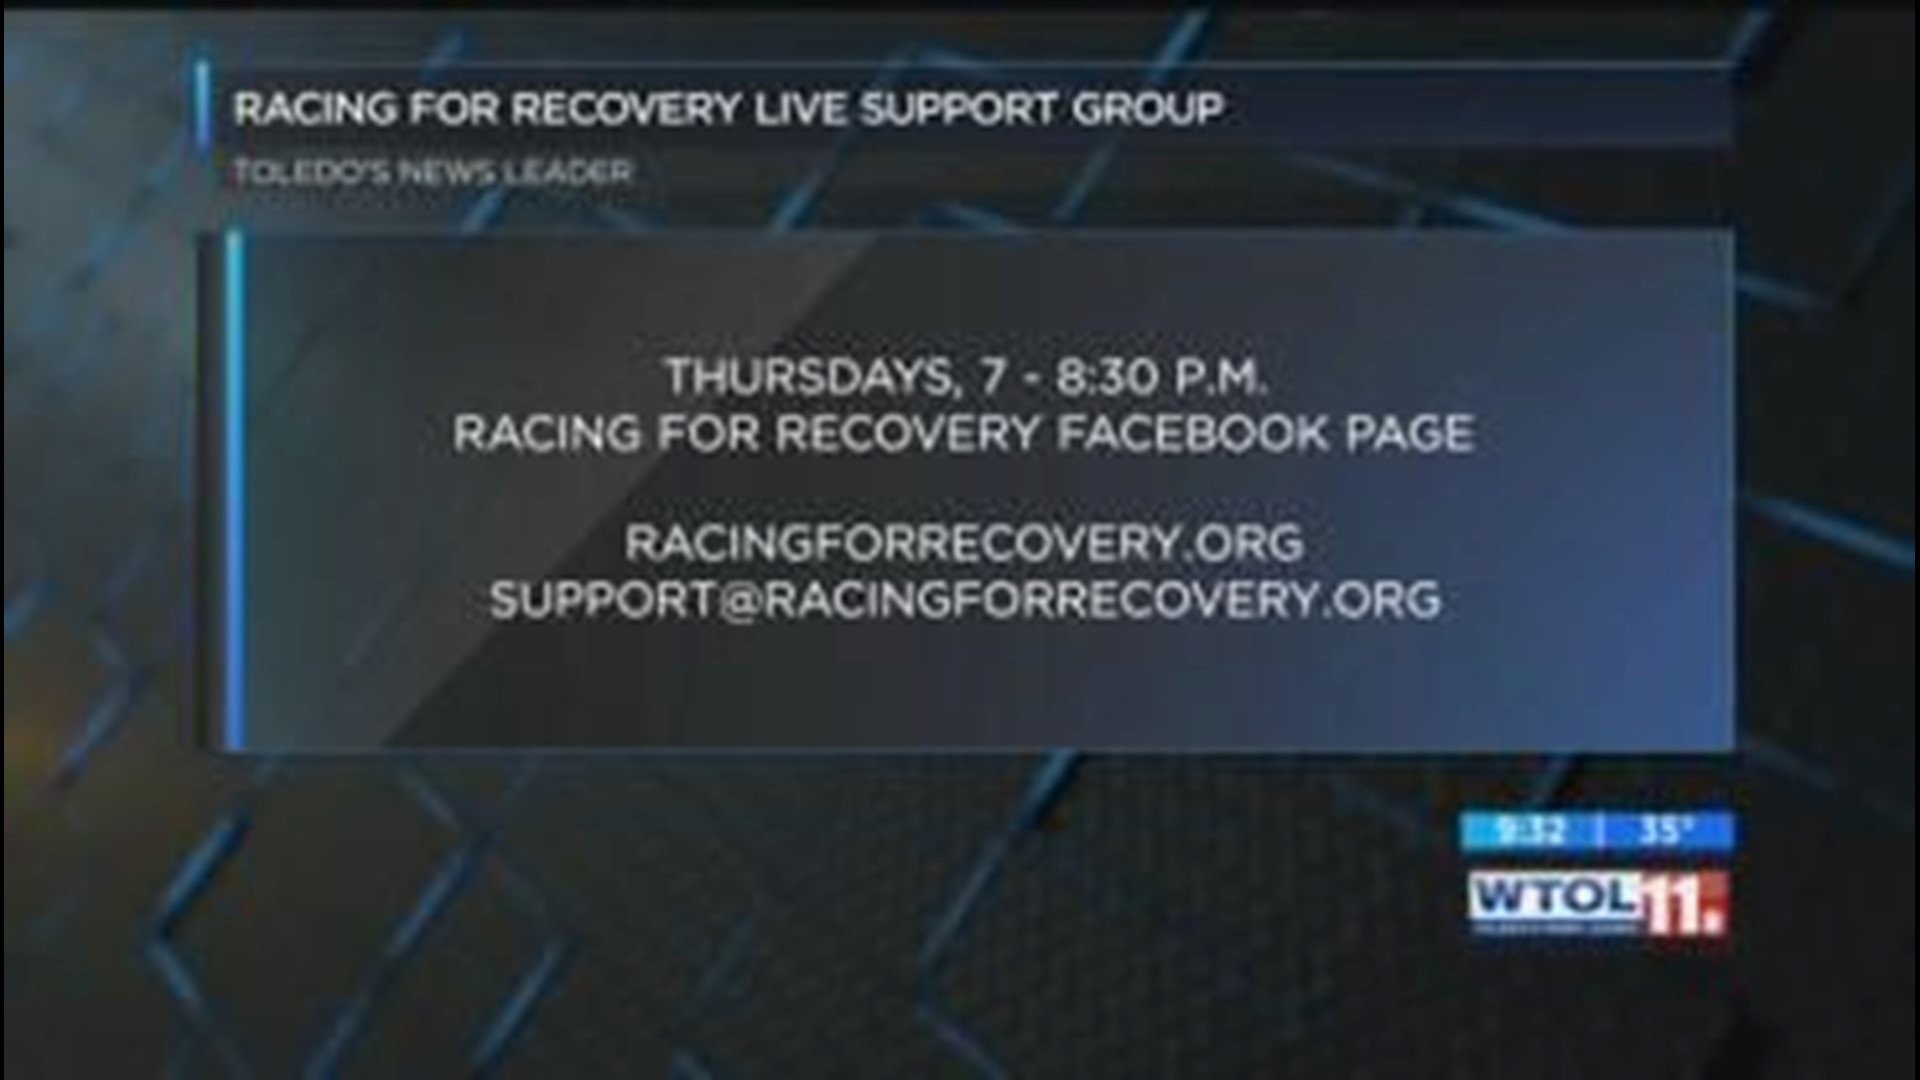 Racing for Recovery offers online help for those who need it